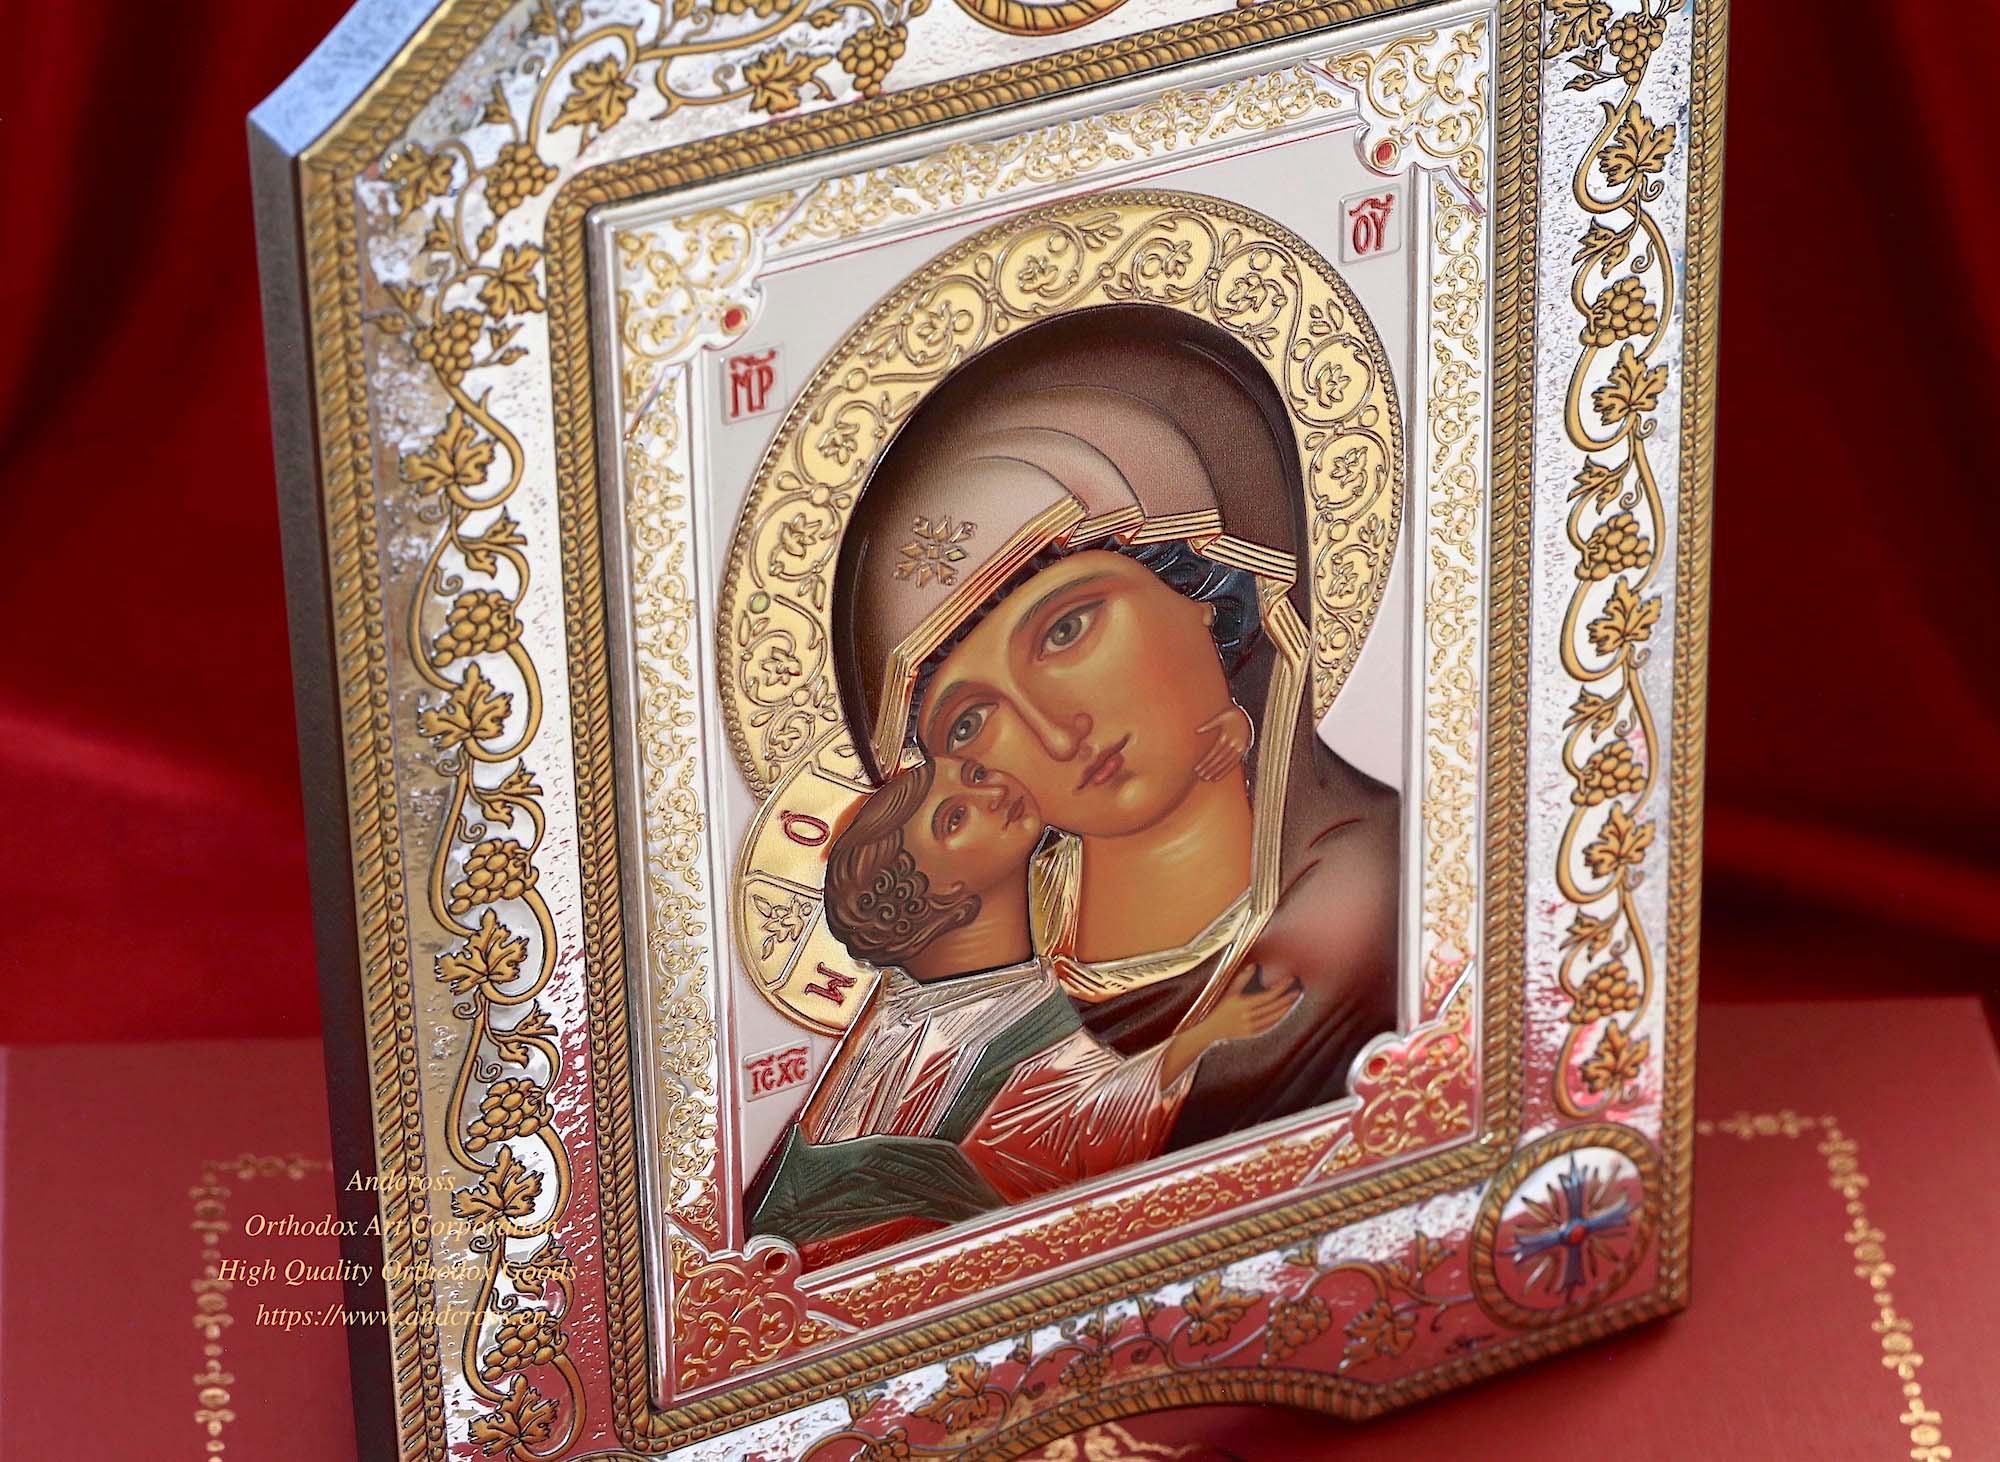 The great miraculous christian orthodox silver Icon- The Vladimir Mother of God|The great miraculous christian orthodox silver Icon- The Vladimir Mother of God|The great miraculous christian orthodox silver Icon- The Vladimir Mother of God|The great miraculous christian orthodox silver Icon- The Vladimir Mother of God|The great miraculous christian orthodox silver Icon- The Vladimir Mother of God|The great miraculous christian orthodox silver Icon- The Vladimir Mother of God